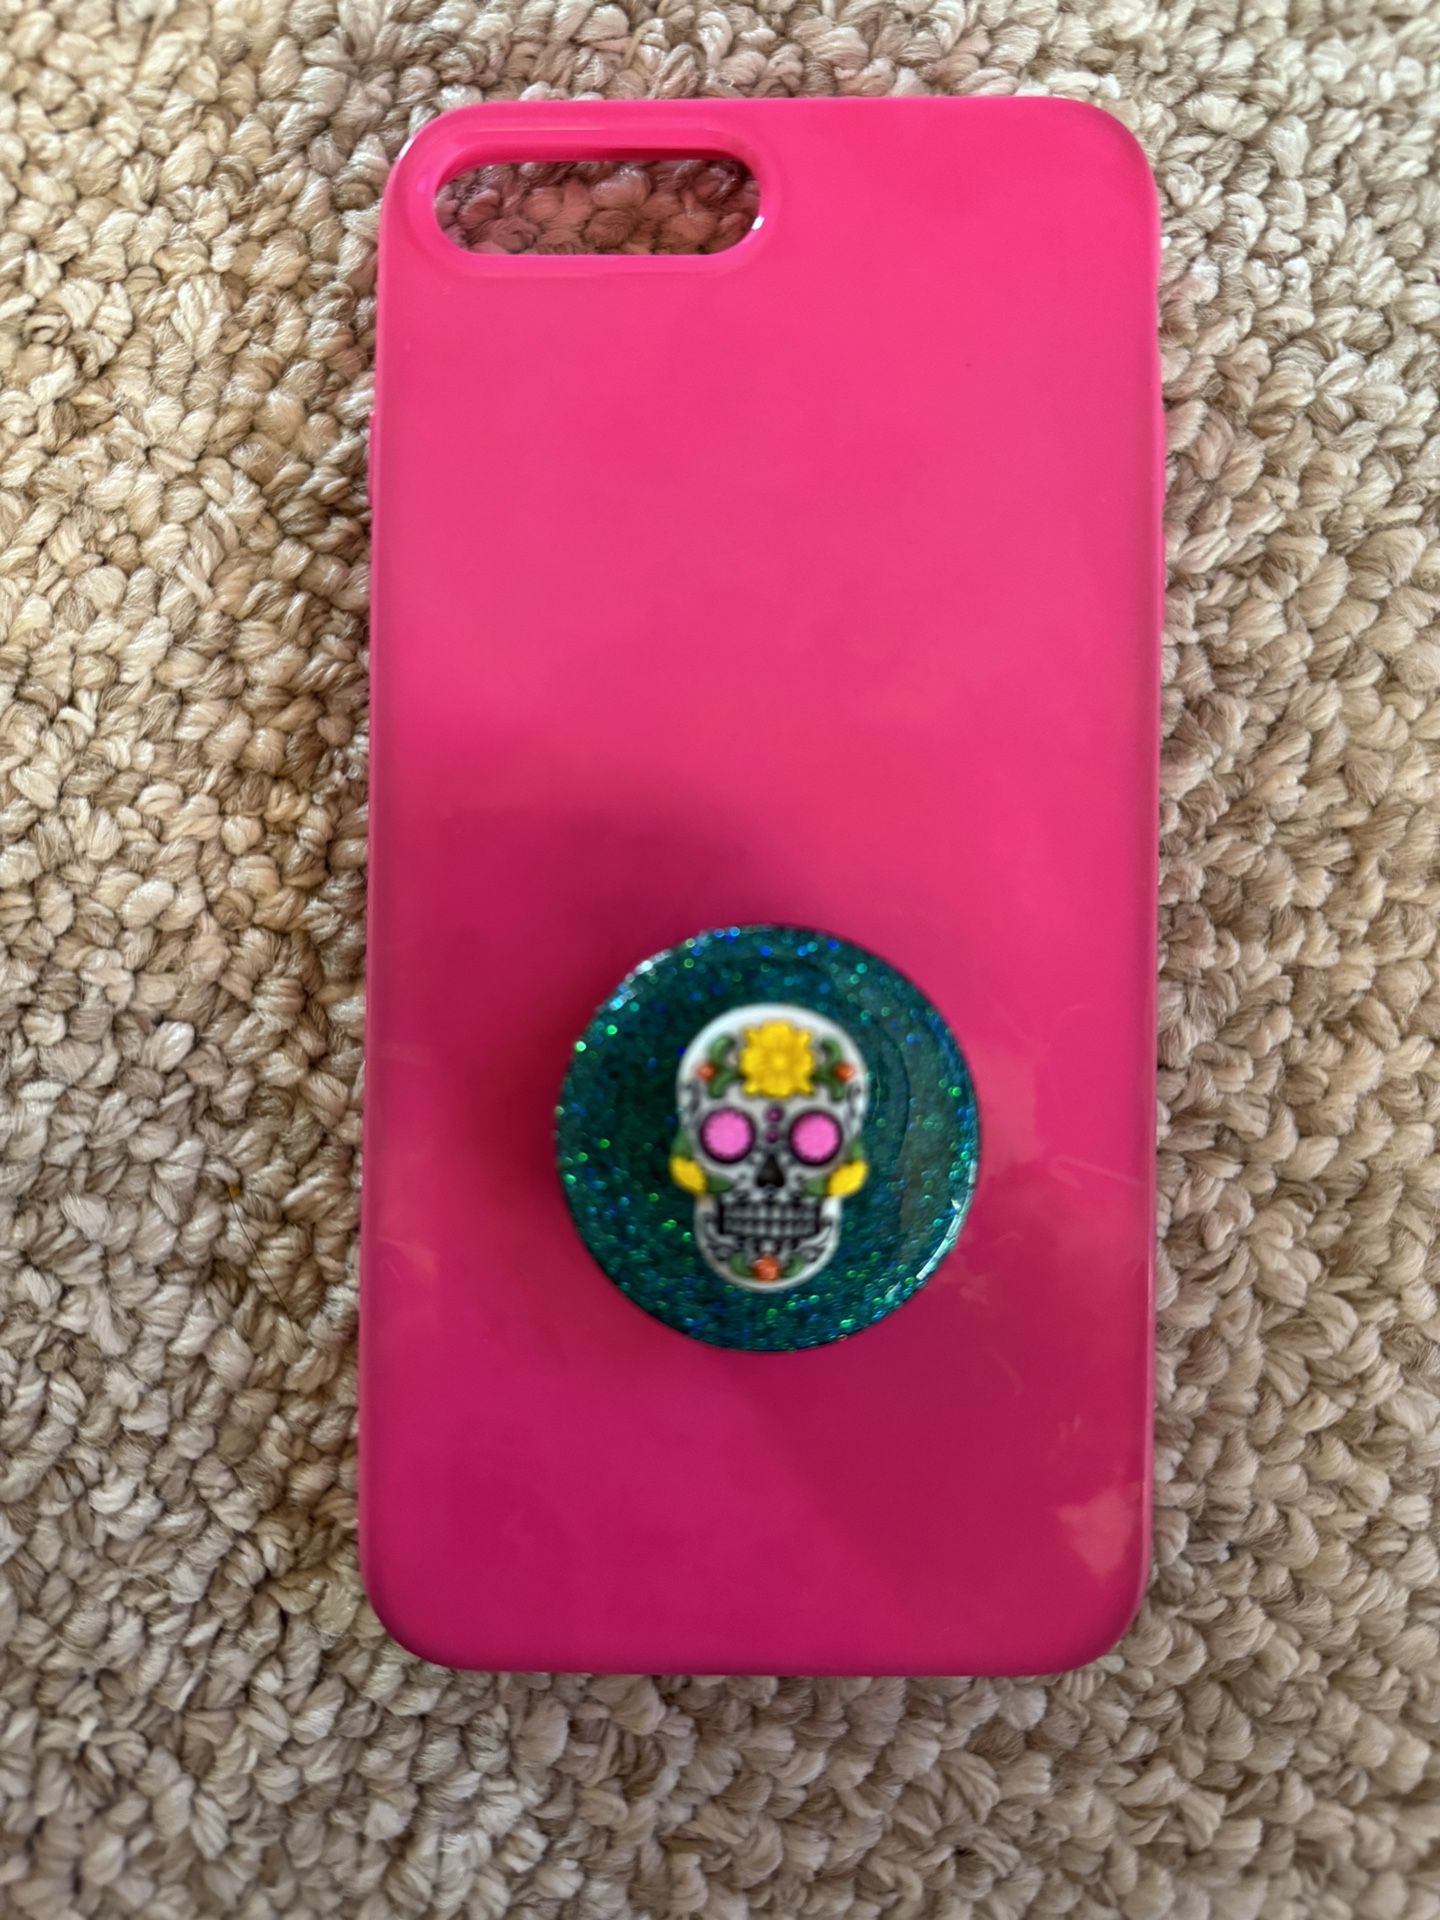 iPhone 8 Plus Cases With Pop Socket 